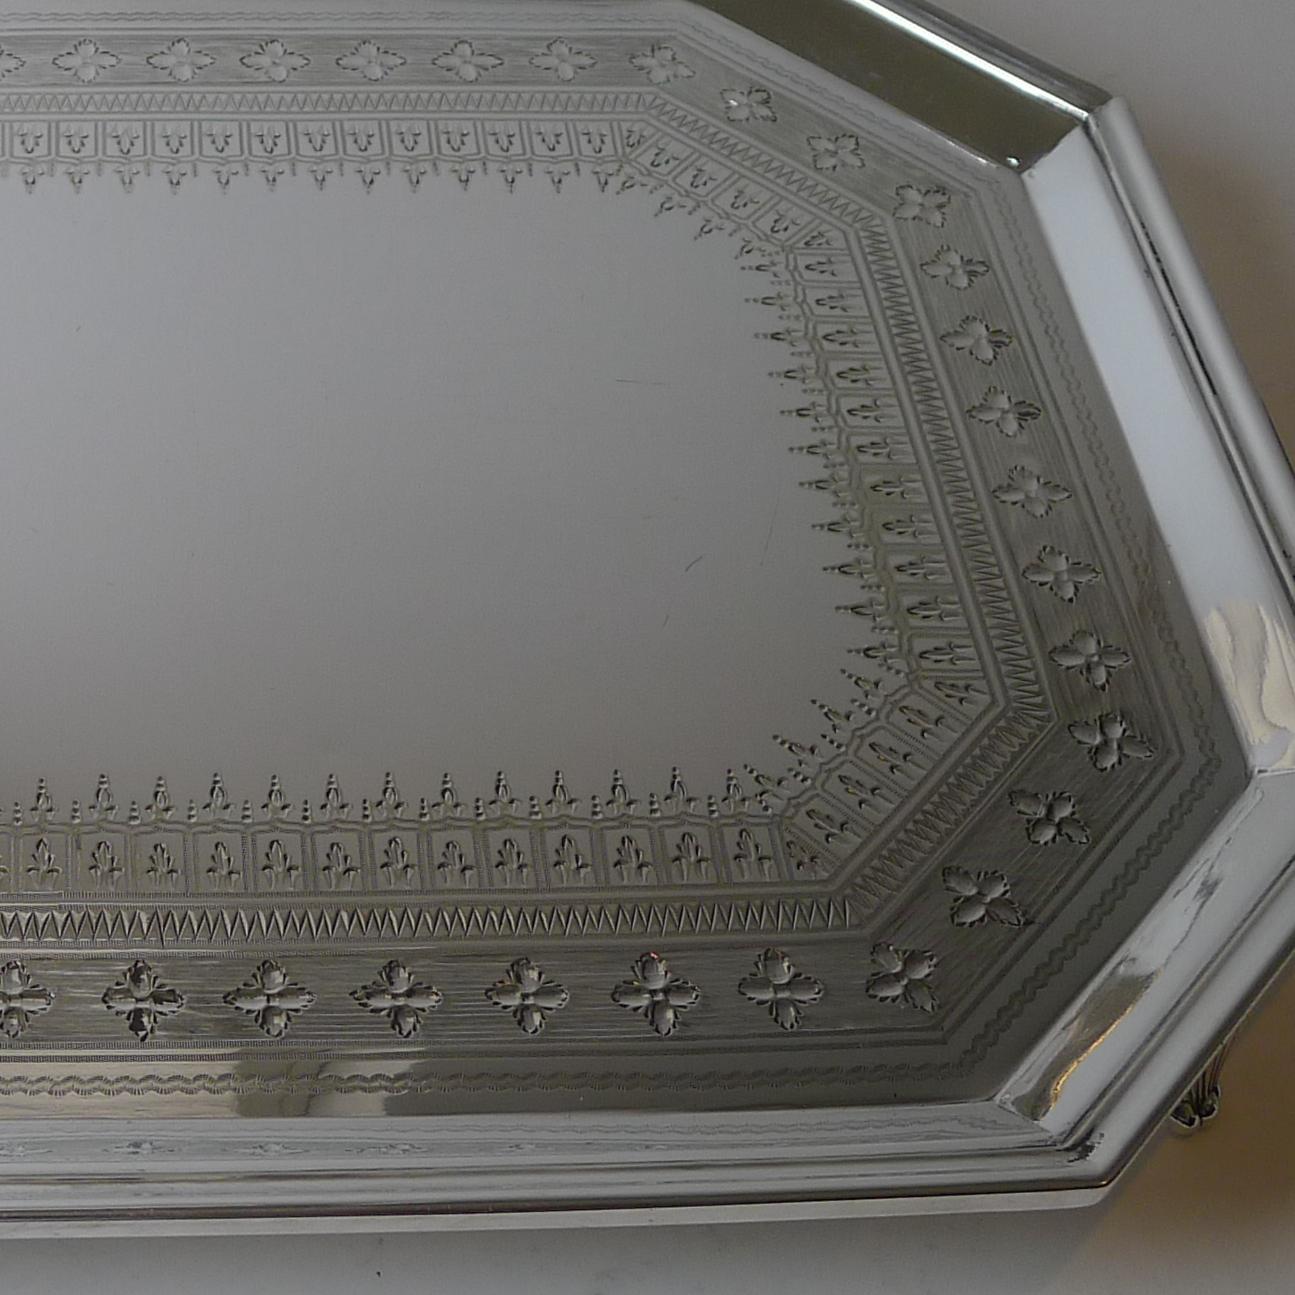 Quality Silver Plated Cocktail / Drinks Tray by Goldsmiths & Silversmiths Co. c. In Good Condition For Sale In Bath, GB